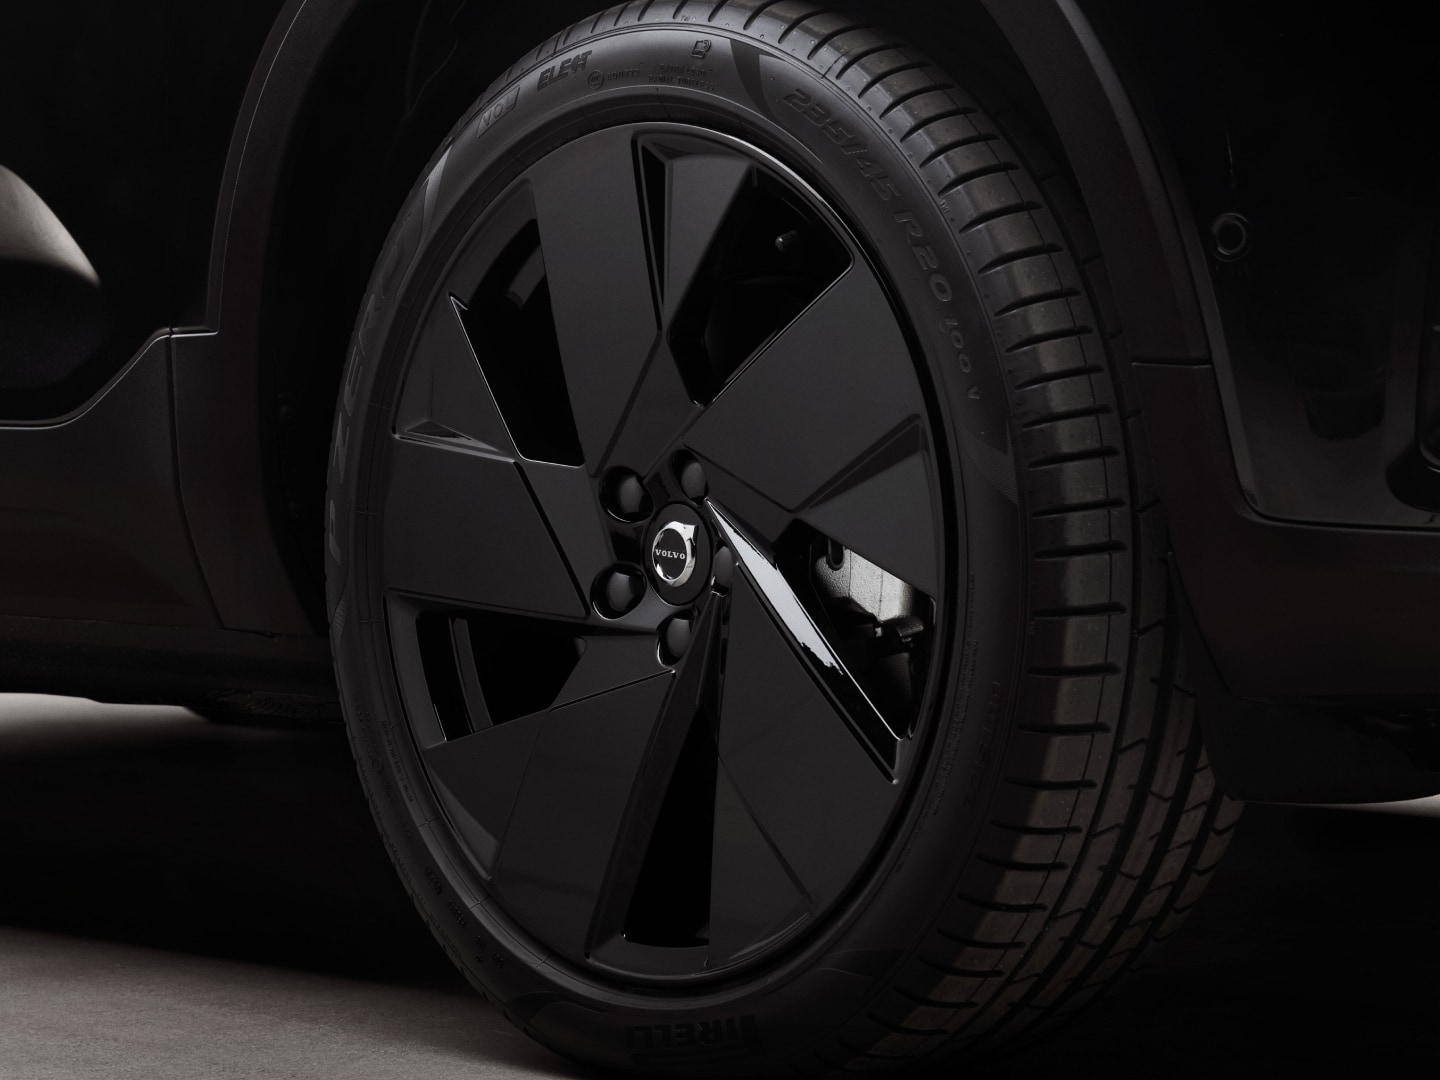 The large high-gloss wheels, available on the Volvo EC40 Black Edition.